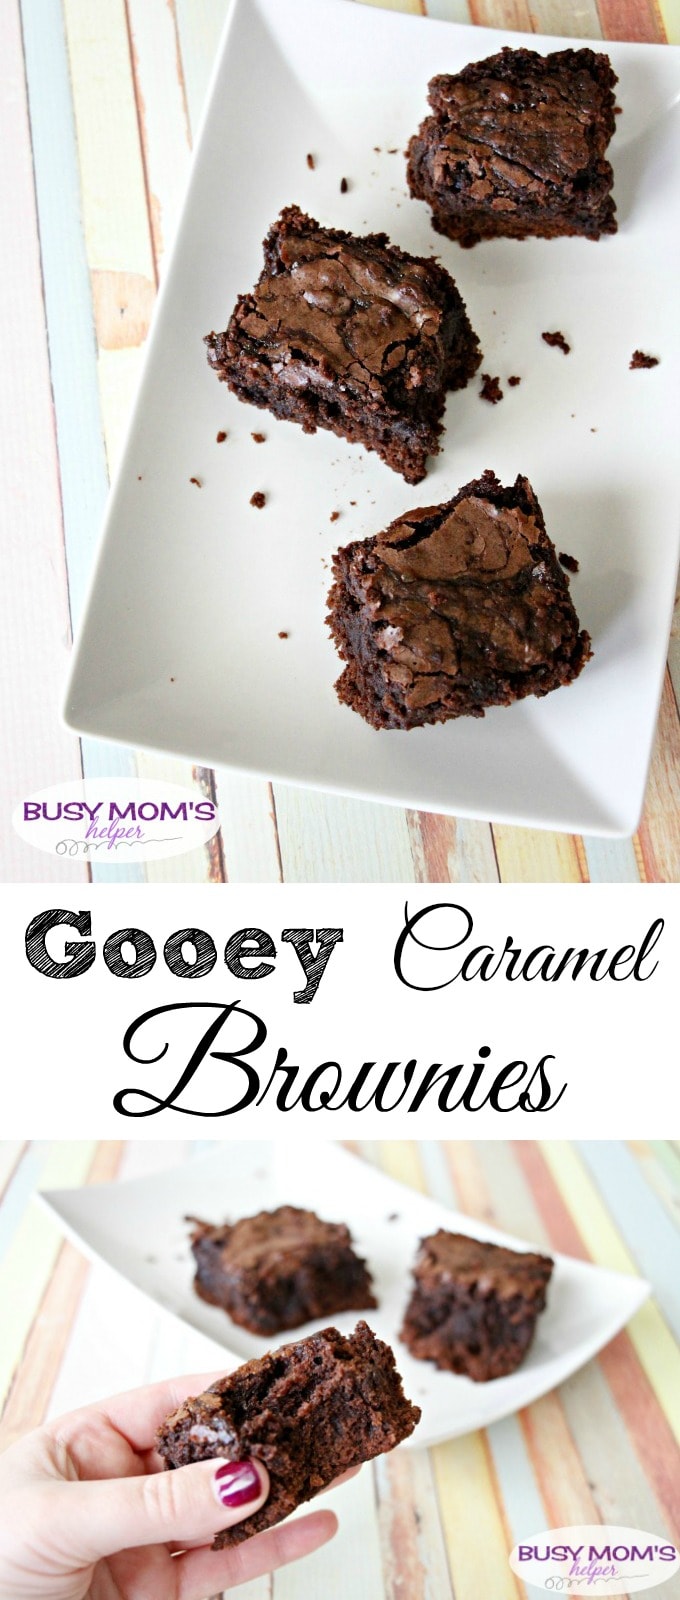 Gooey Chocolate Brownies / by BusyMomsHelper.com for CarrieElle.com